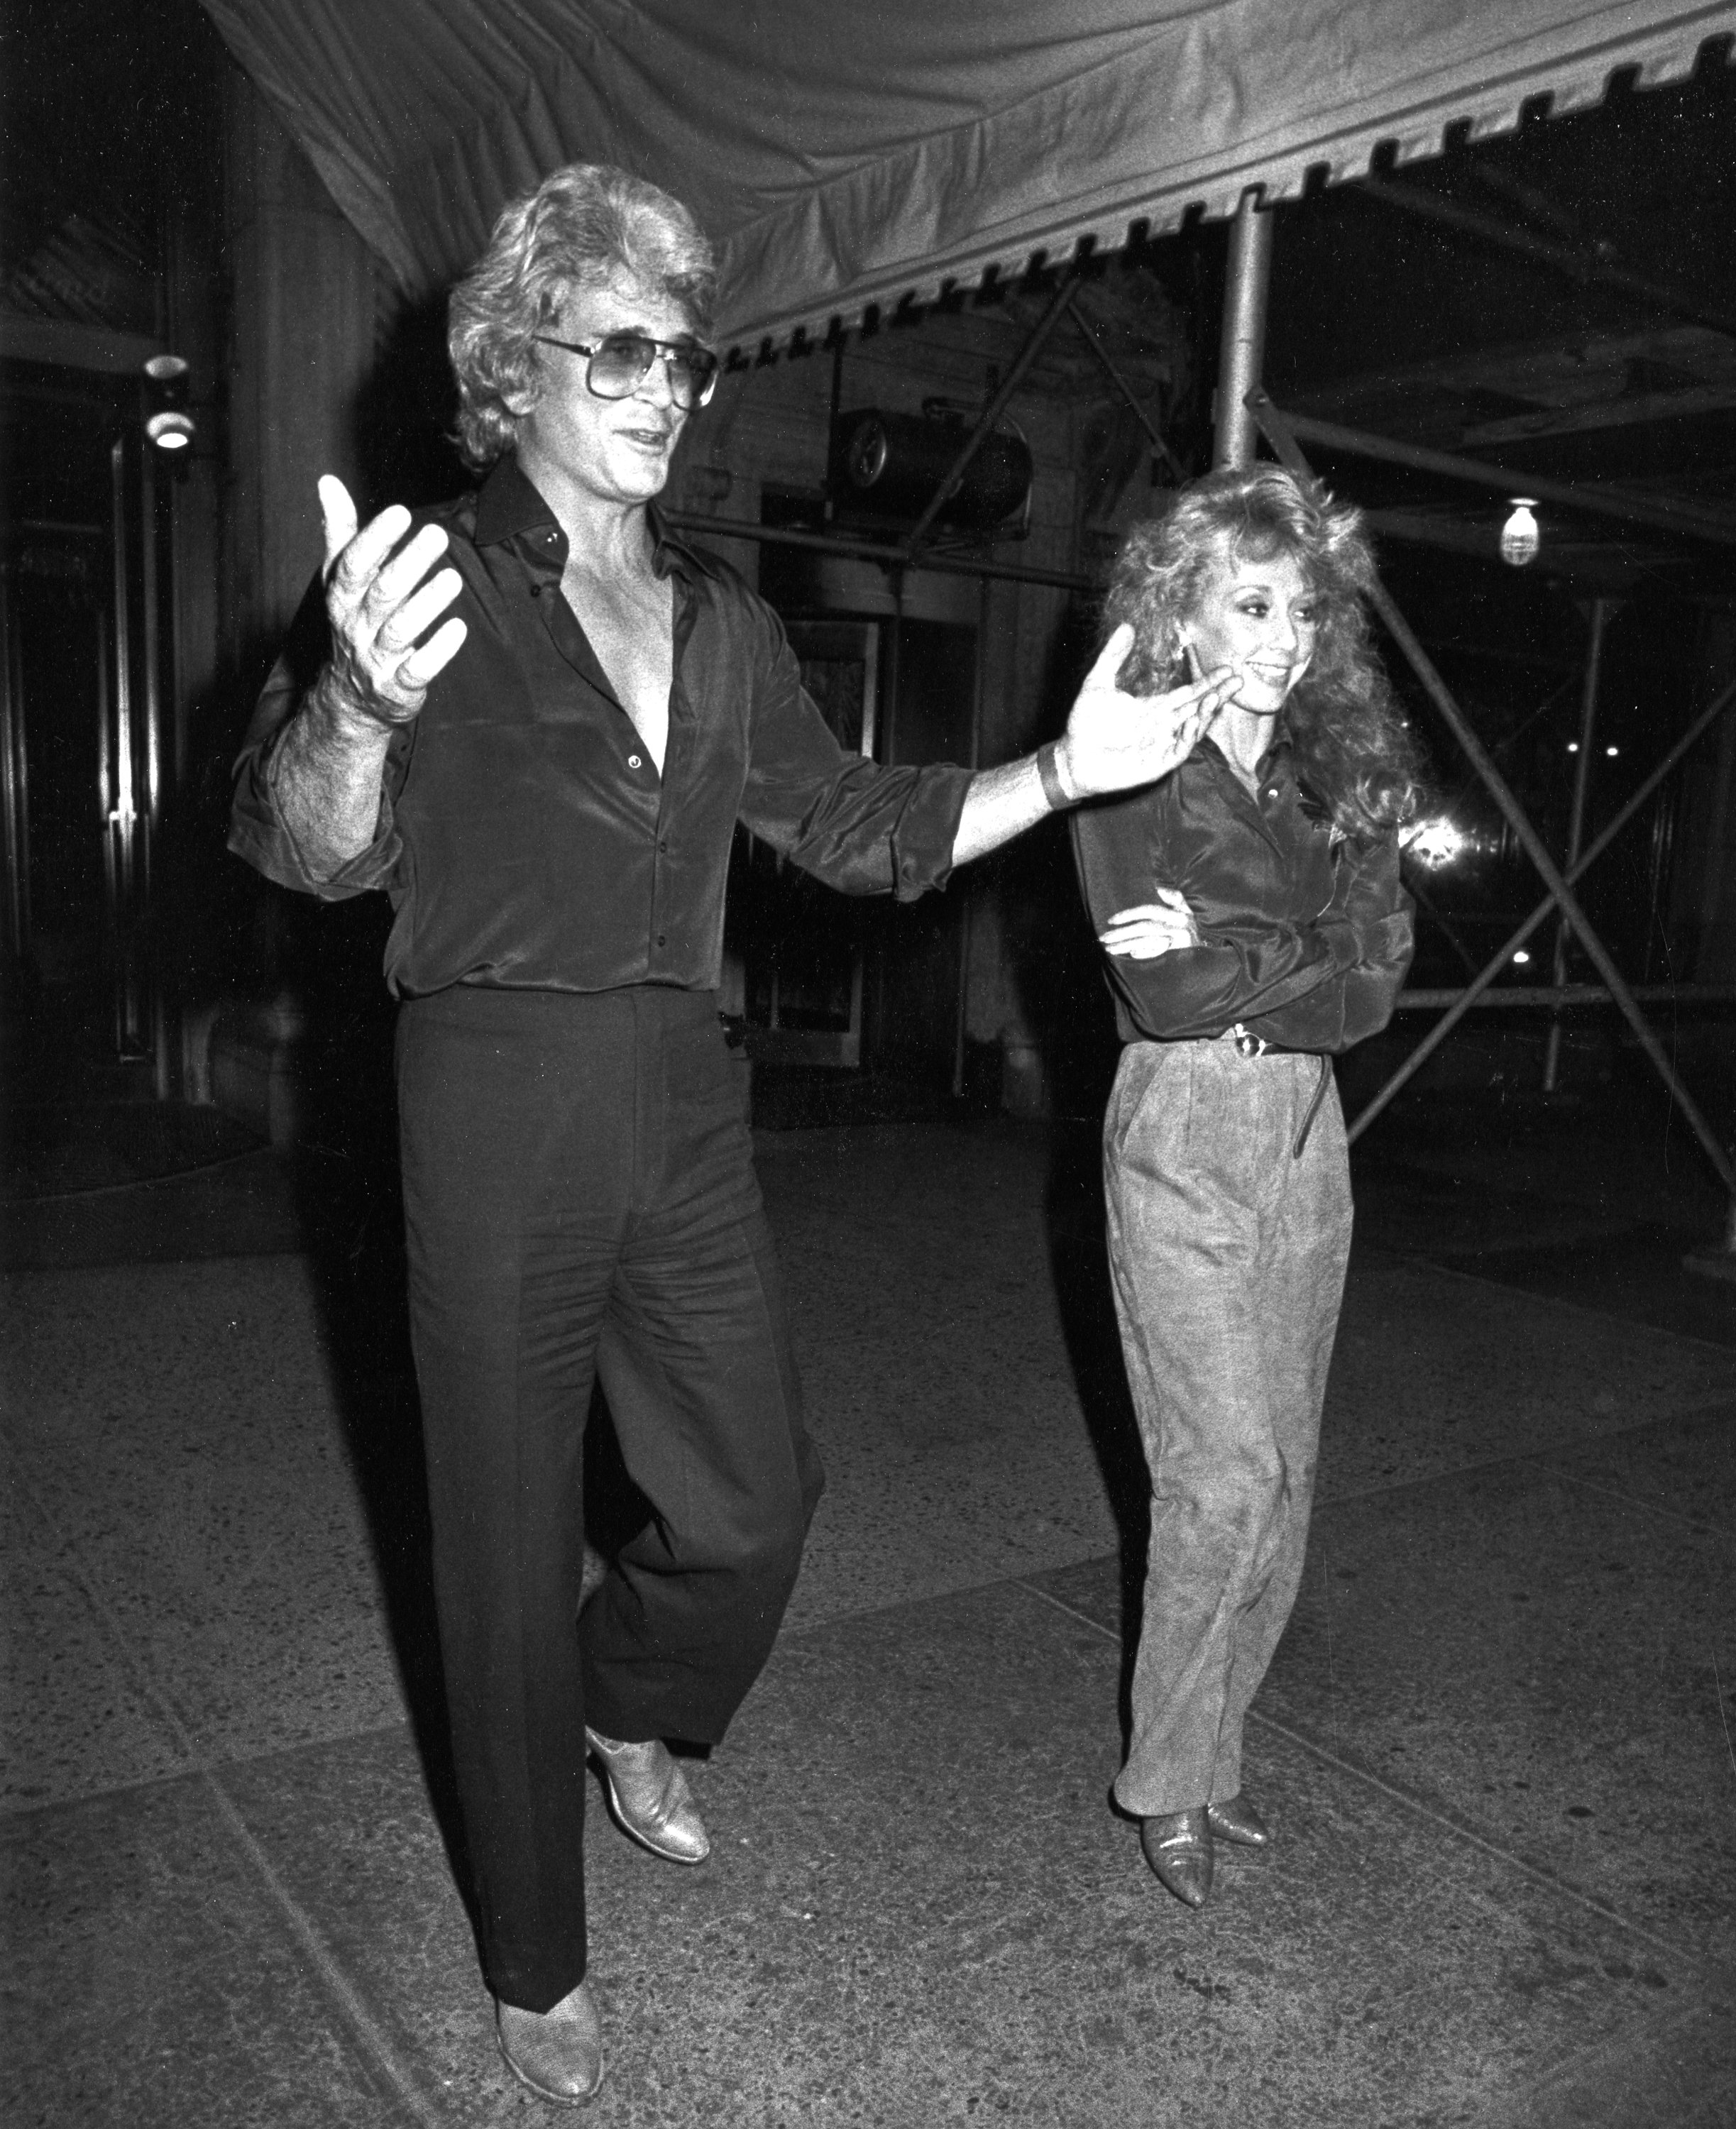 Michael Landon and Cindy Clerico seen at the Sherry Netherland Hotel on November 21, 1982 in Los Angeles, California. / Source: Getty Images